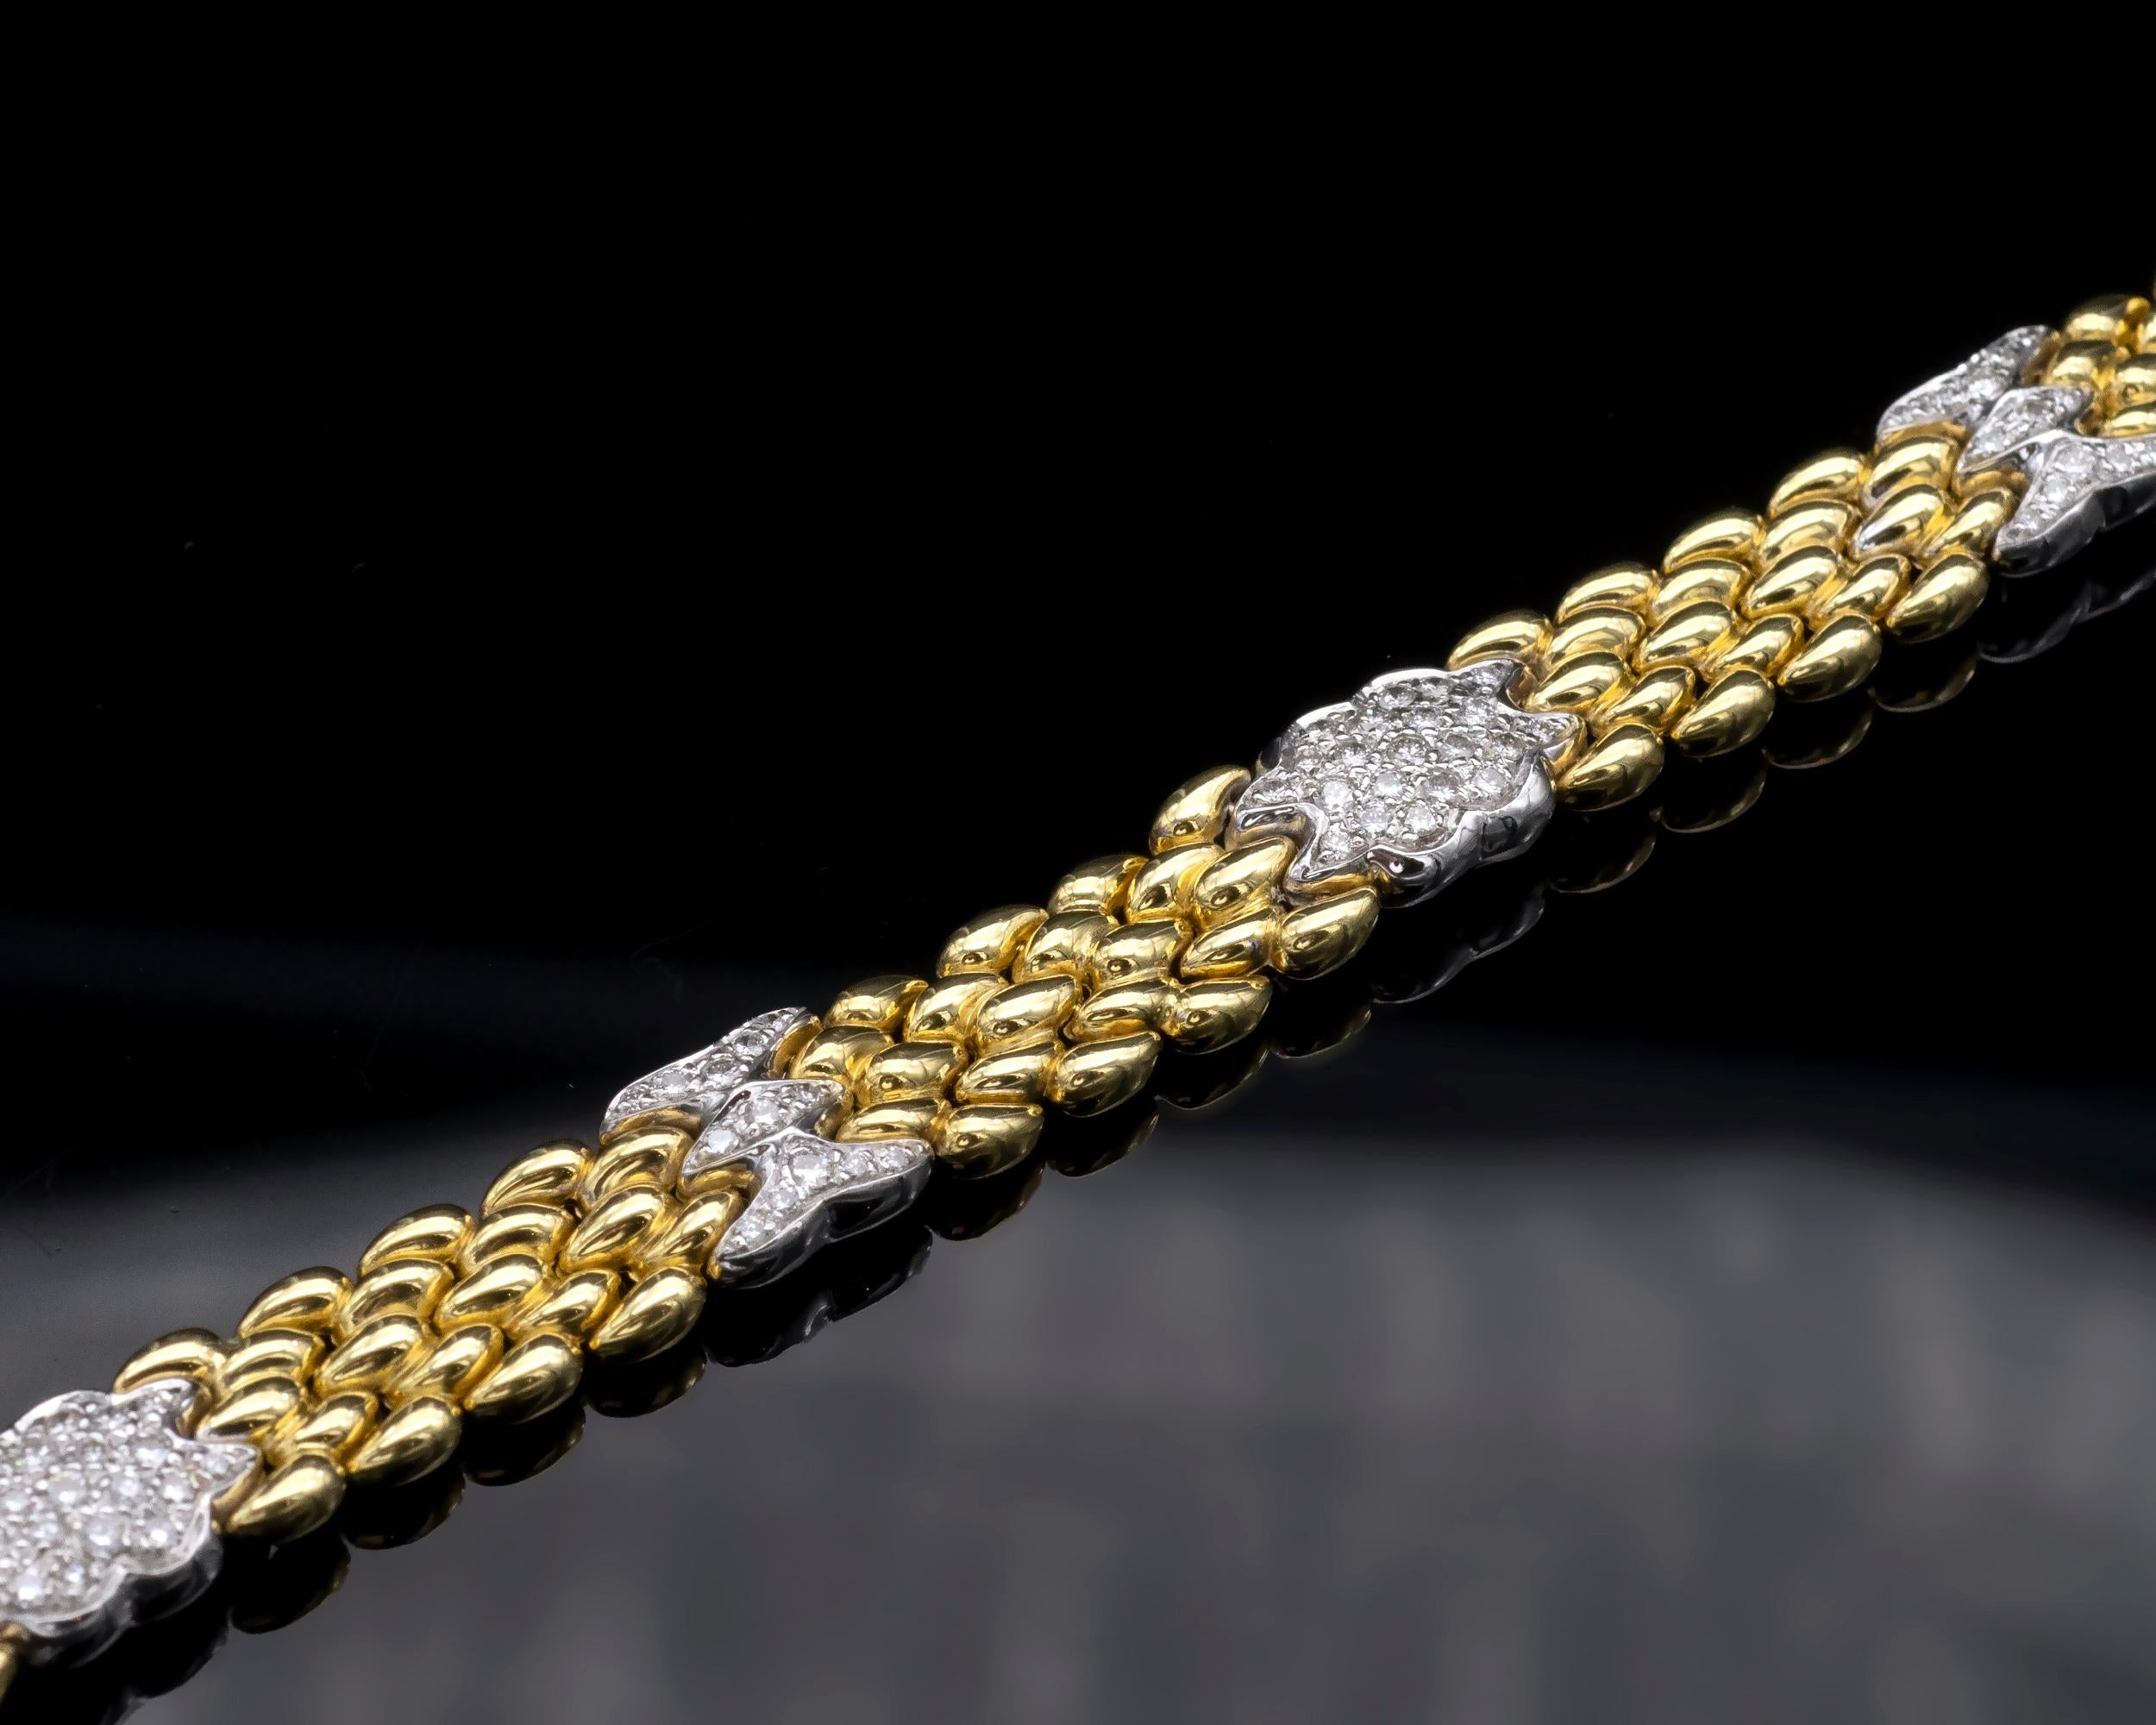 This Chimento, Italian-crafted 18 karat bracelet is made in two-tone gold and adorned with fine round brilliant cut diamonds. A truly classy and splendid bracelet, Chimento is engraved on the clasp. Its soft and supple chain means that not only is